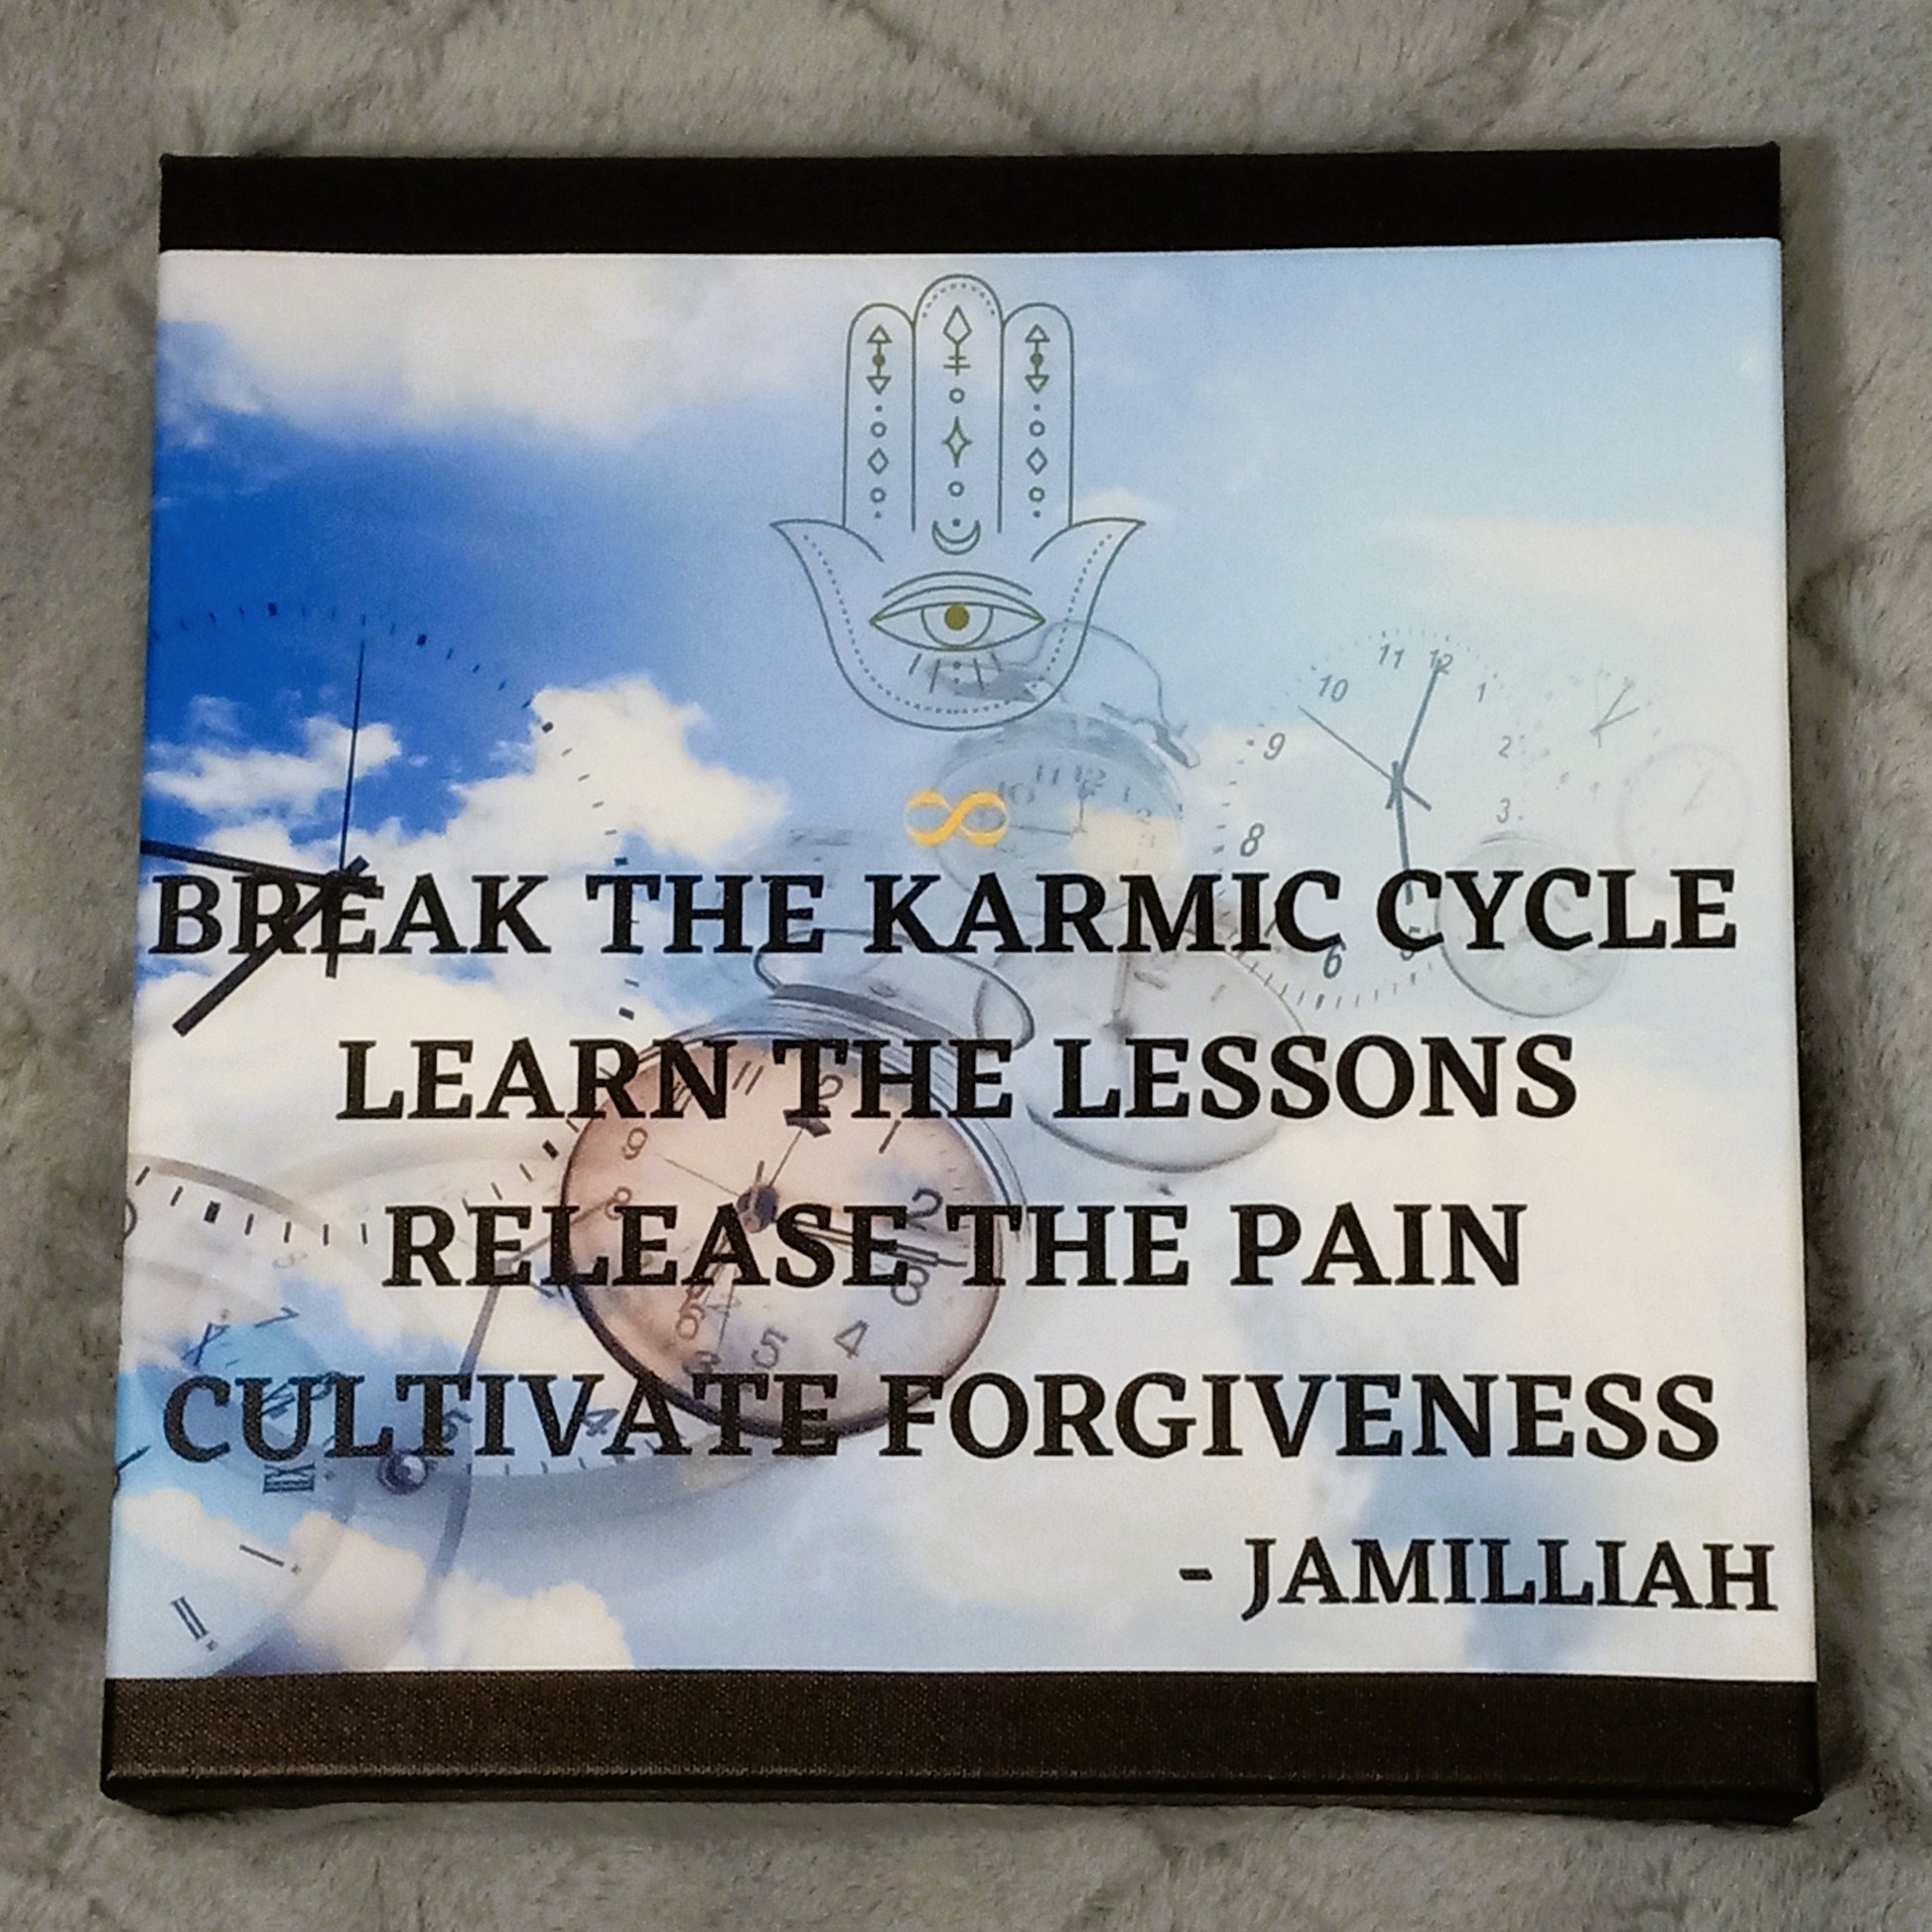 12x12 inch canvas print with original logo and authentic saying. Wall art with clocks in the blue, clouded sky with hamsa hand/infinity sign logo, and black printed, unique, wise quote mantra. "Break The Karmic Cycle, Learn The Lessons, Release The Pain, Cultivate Forgiveness." - Jamilliah - Images surrounding majority of textured canvas, with the remainder of the canvas colored black. Shown on wall above bed. JAMILLIAH'S WISDOM IS TIMELESS SHOP - wisdomistimeless.com.